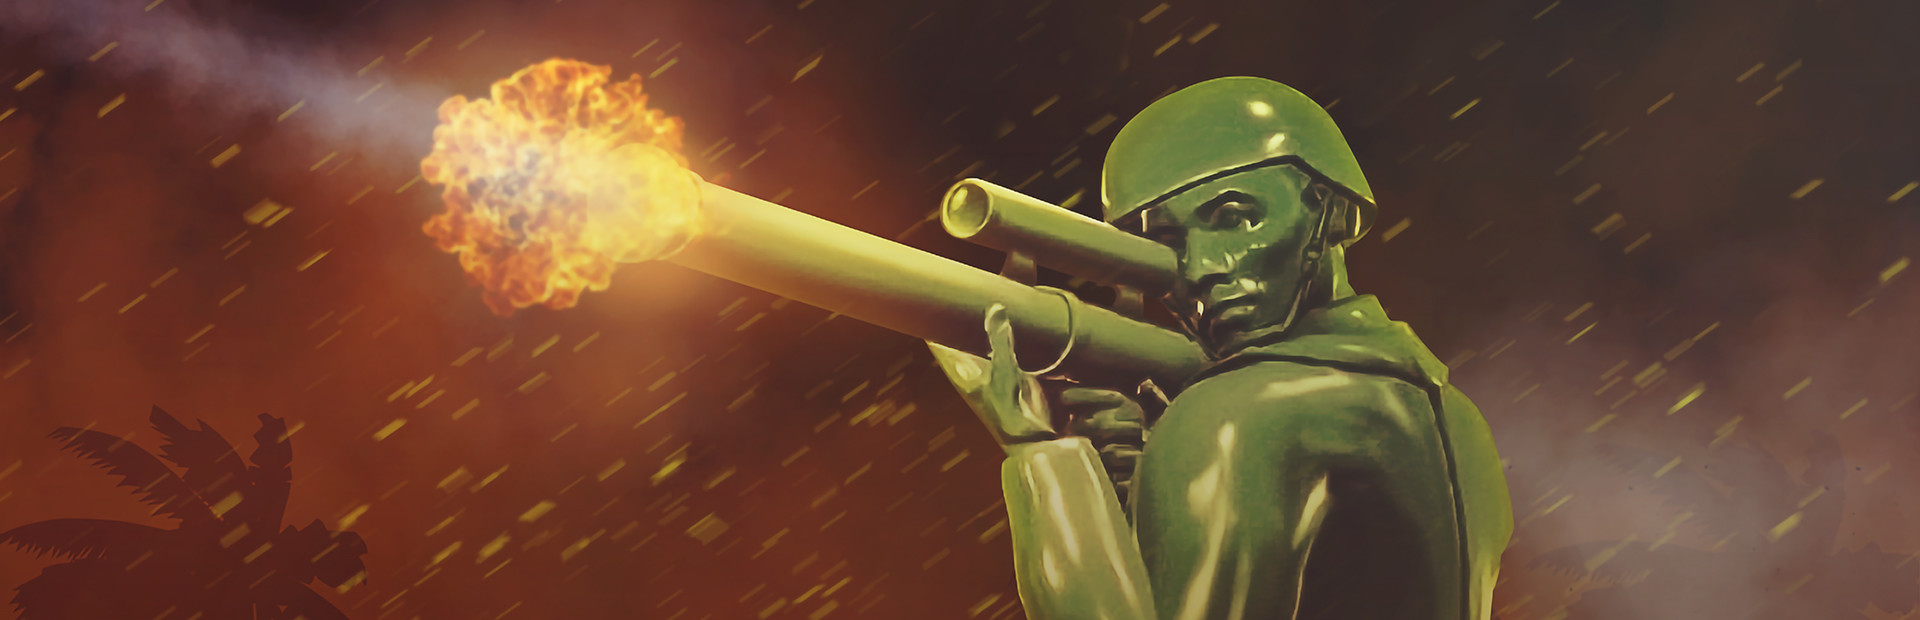 Army Men cover image